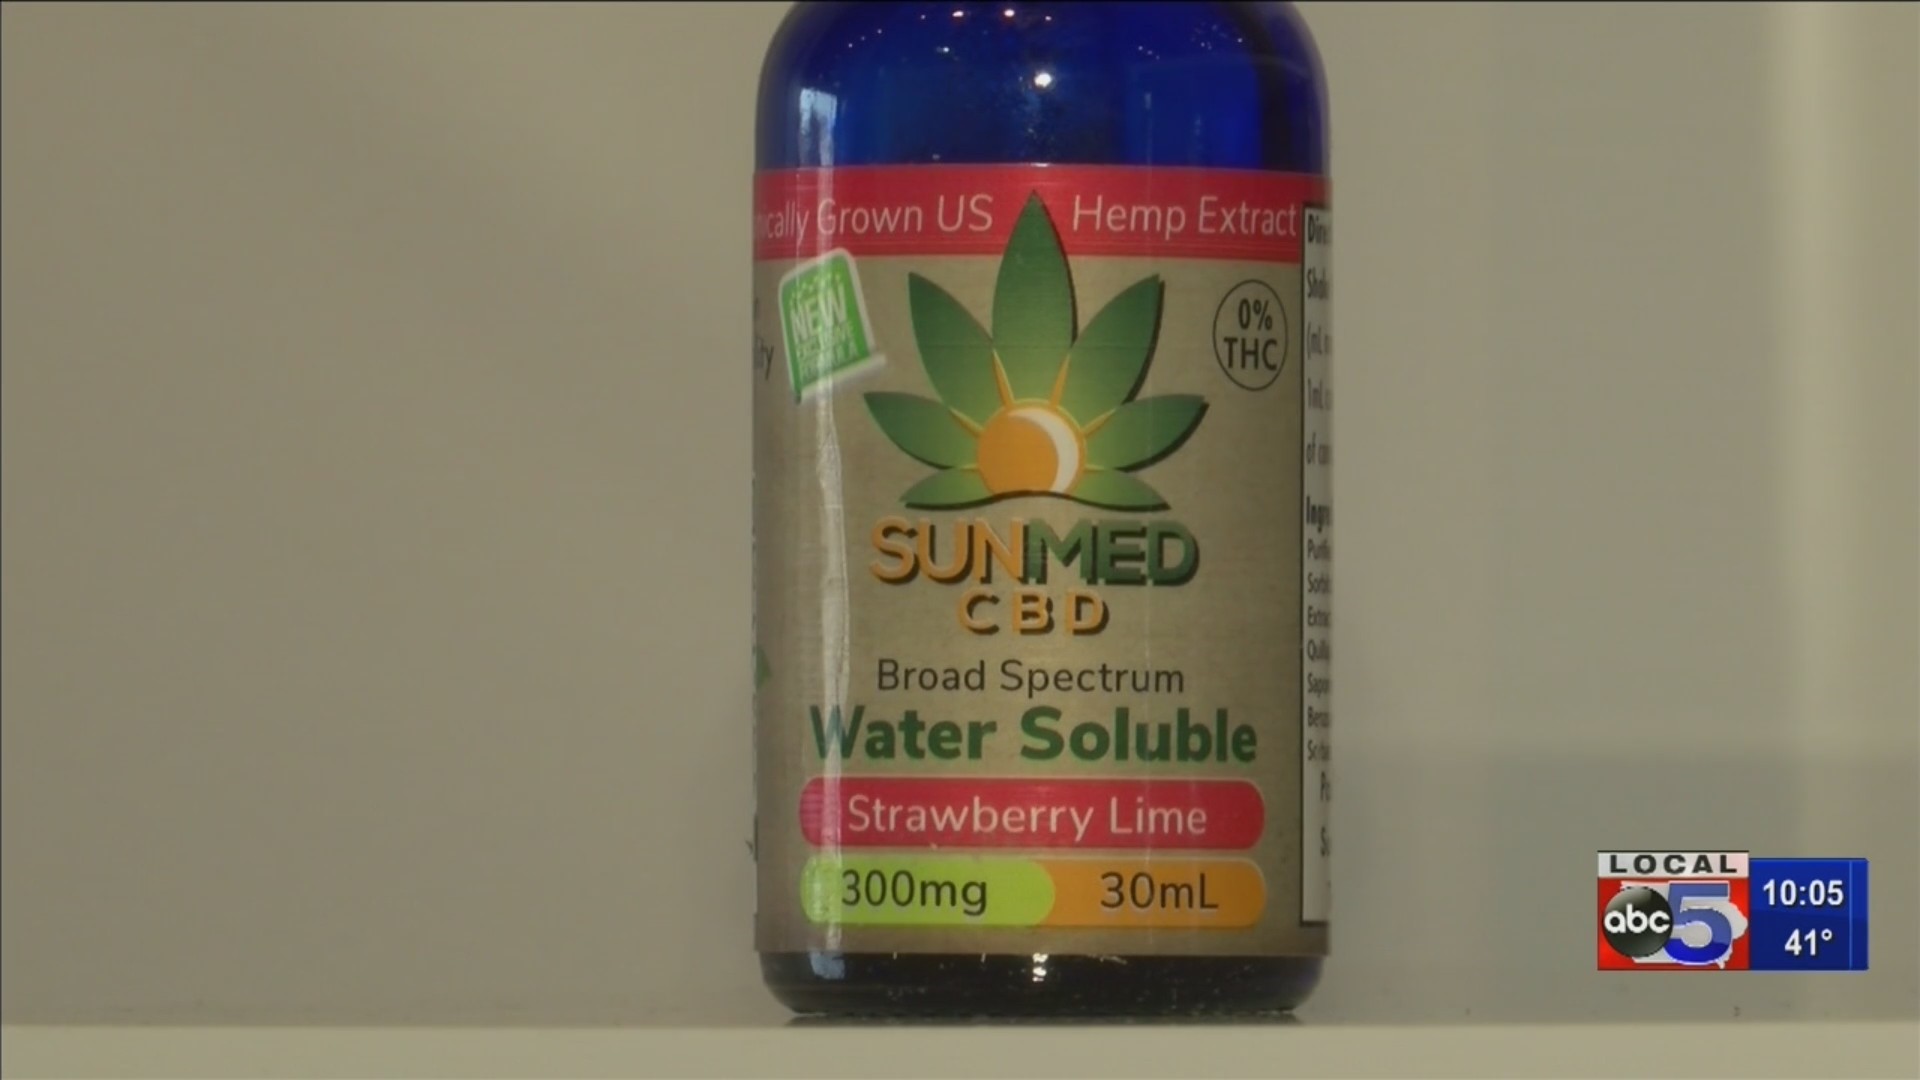 Story County warns of illegal CBD products sold in Iowa